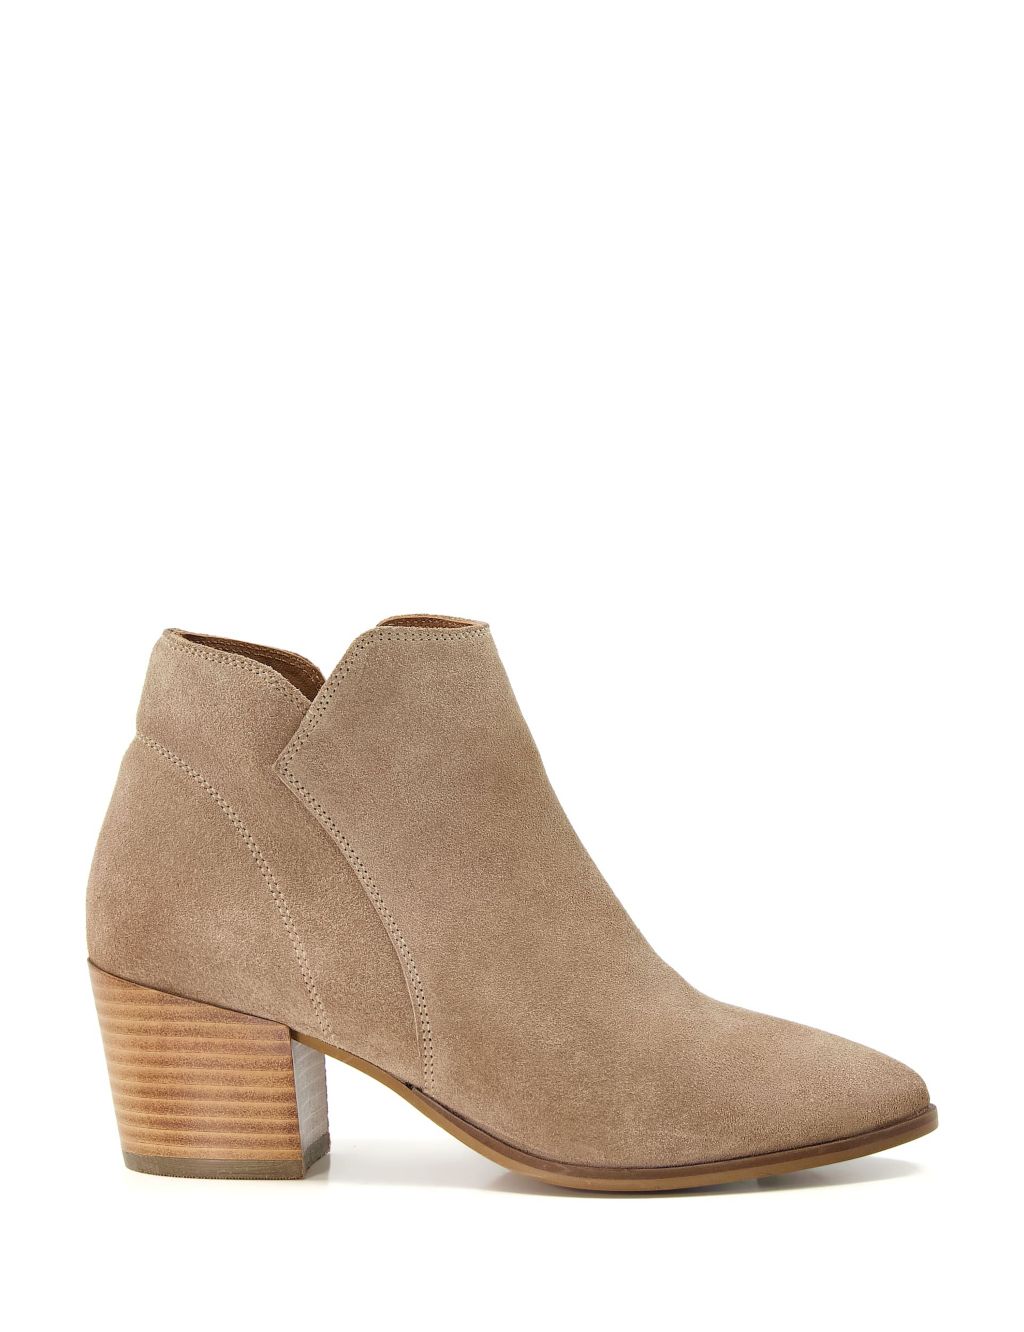 Wide Fit Suede Block Heel Ankle Boots image 1